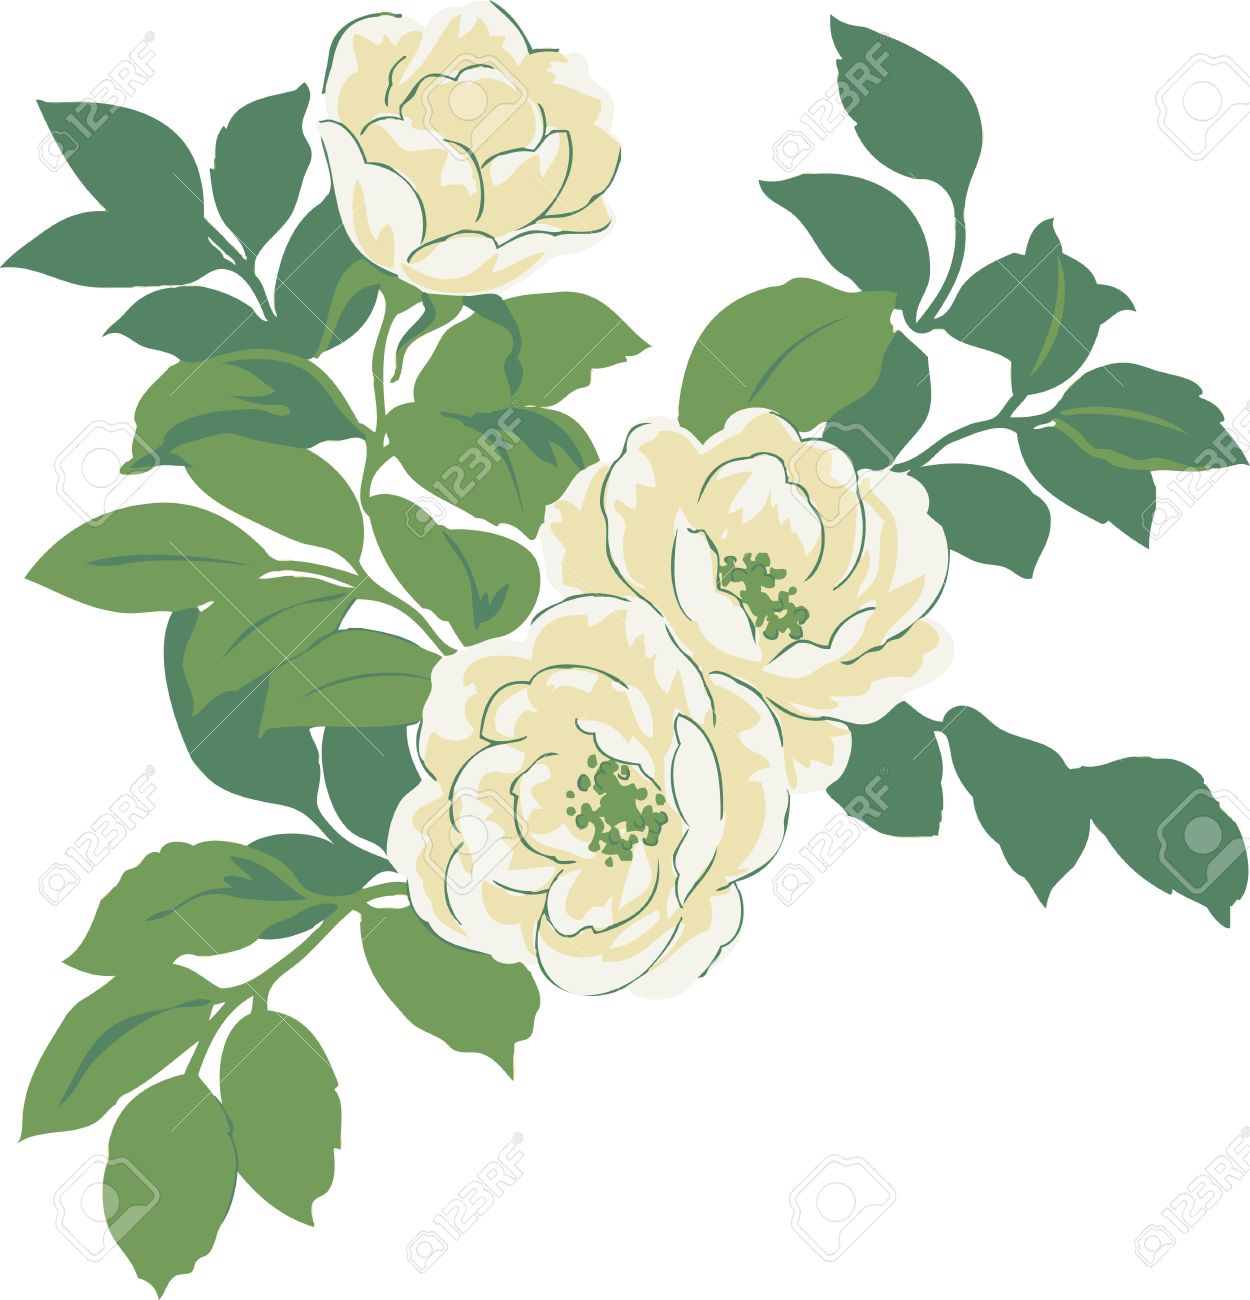 Clipart of natural flowers.